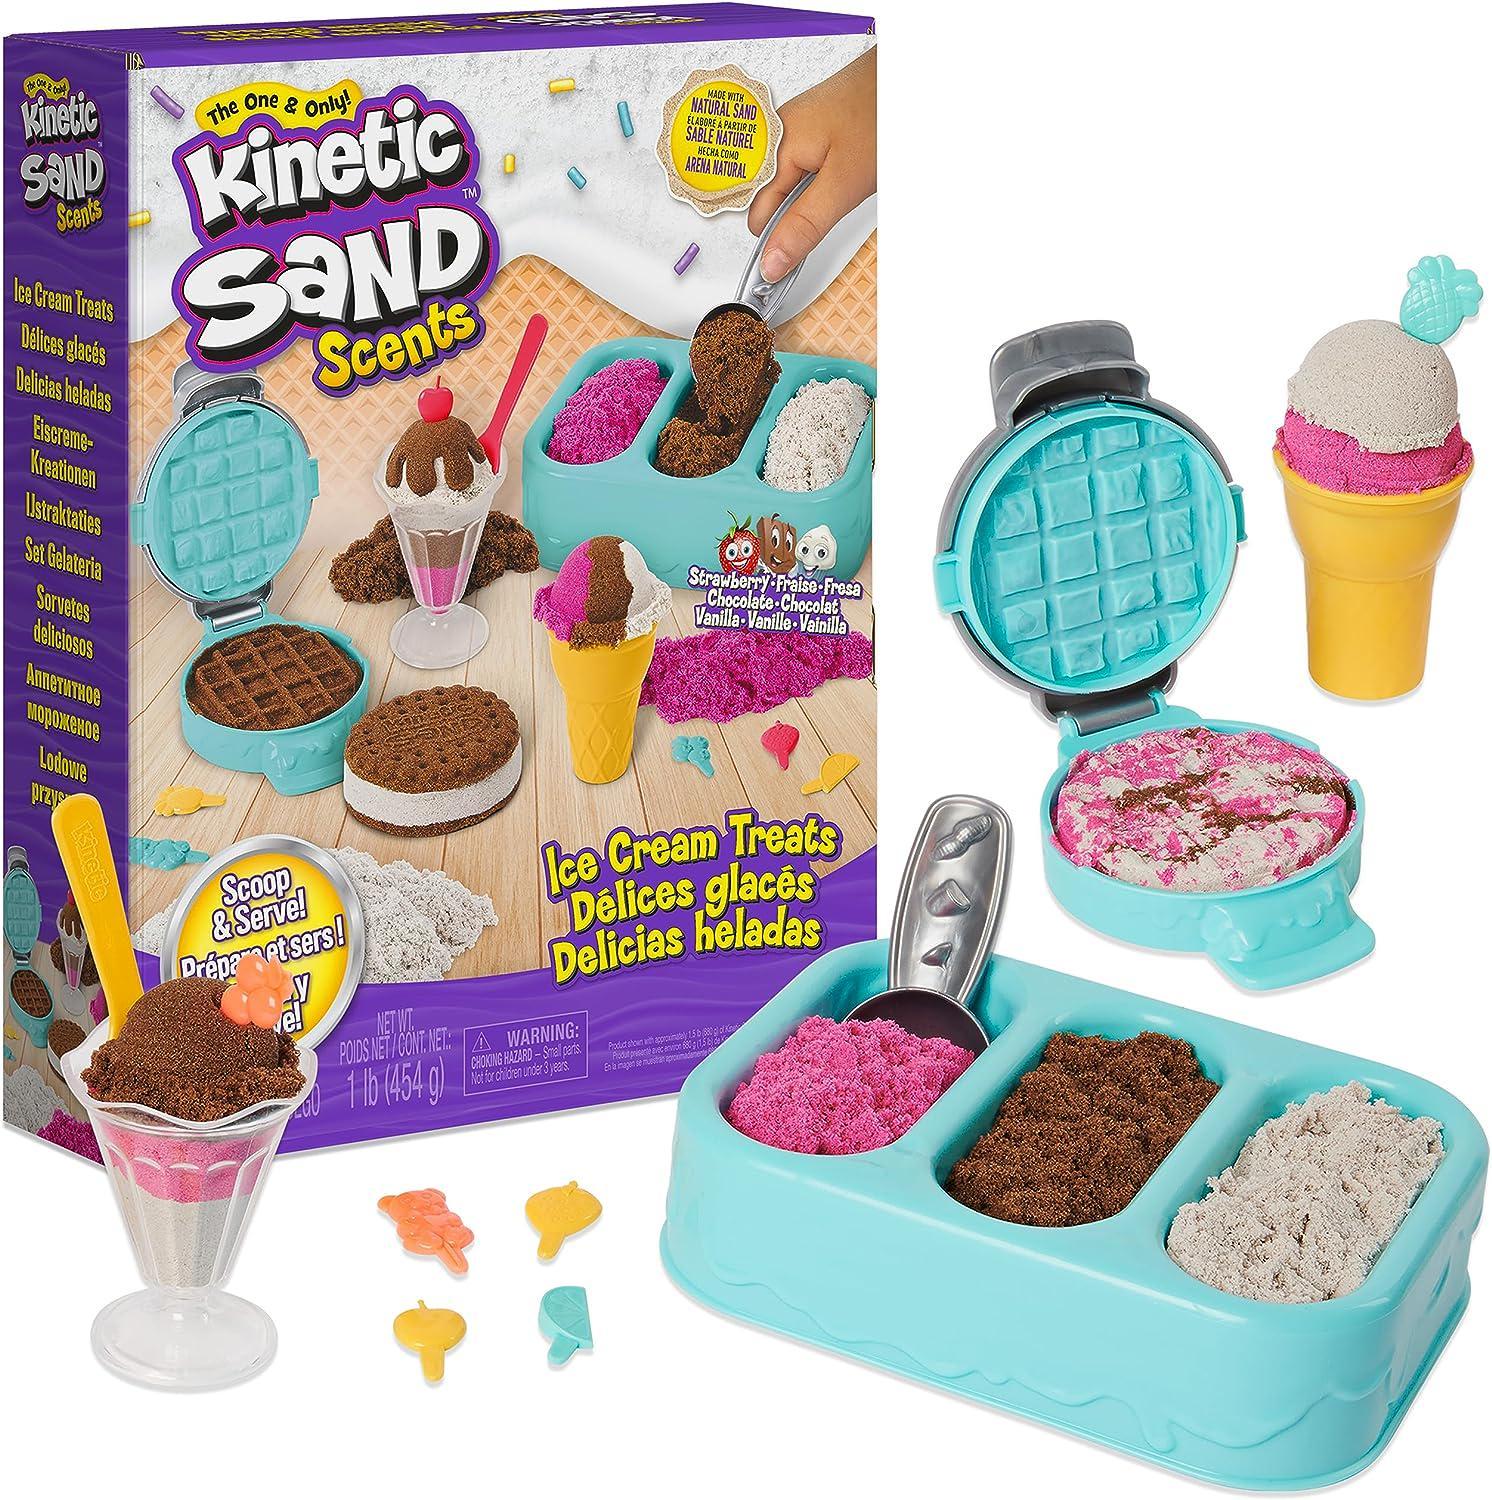 Kinetic Sand Ultimate Sandisfying Set, 2lb of Pink, Yellow and Teal Play  Sand, 10 Molds and Tools, Sensory Toys, for Kids